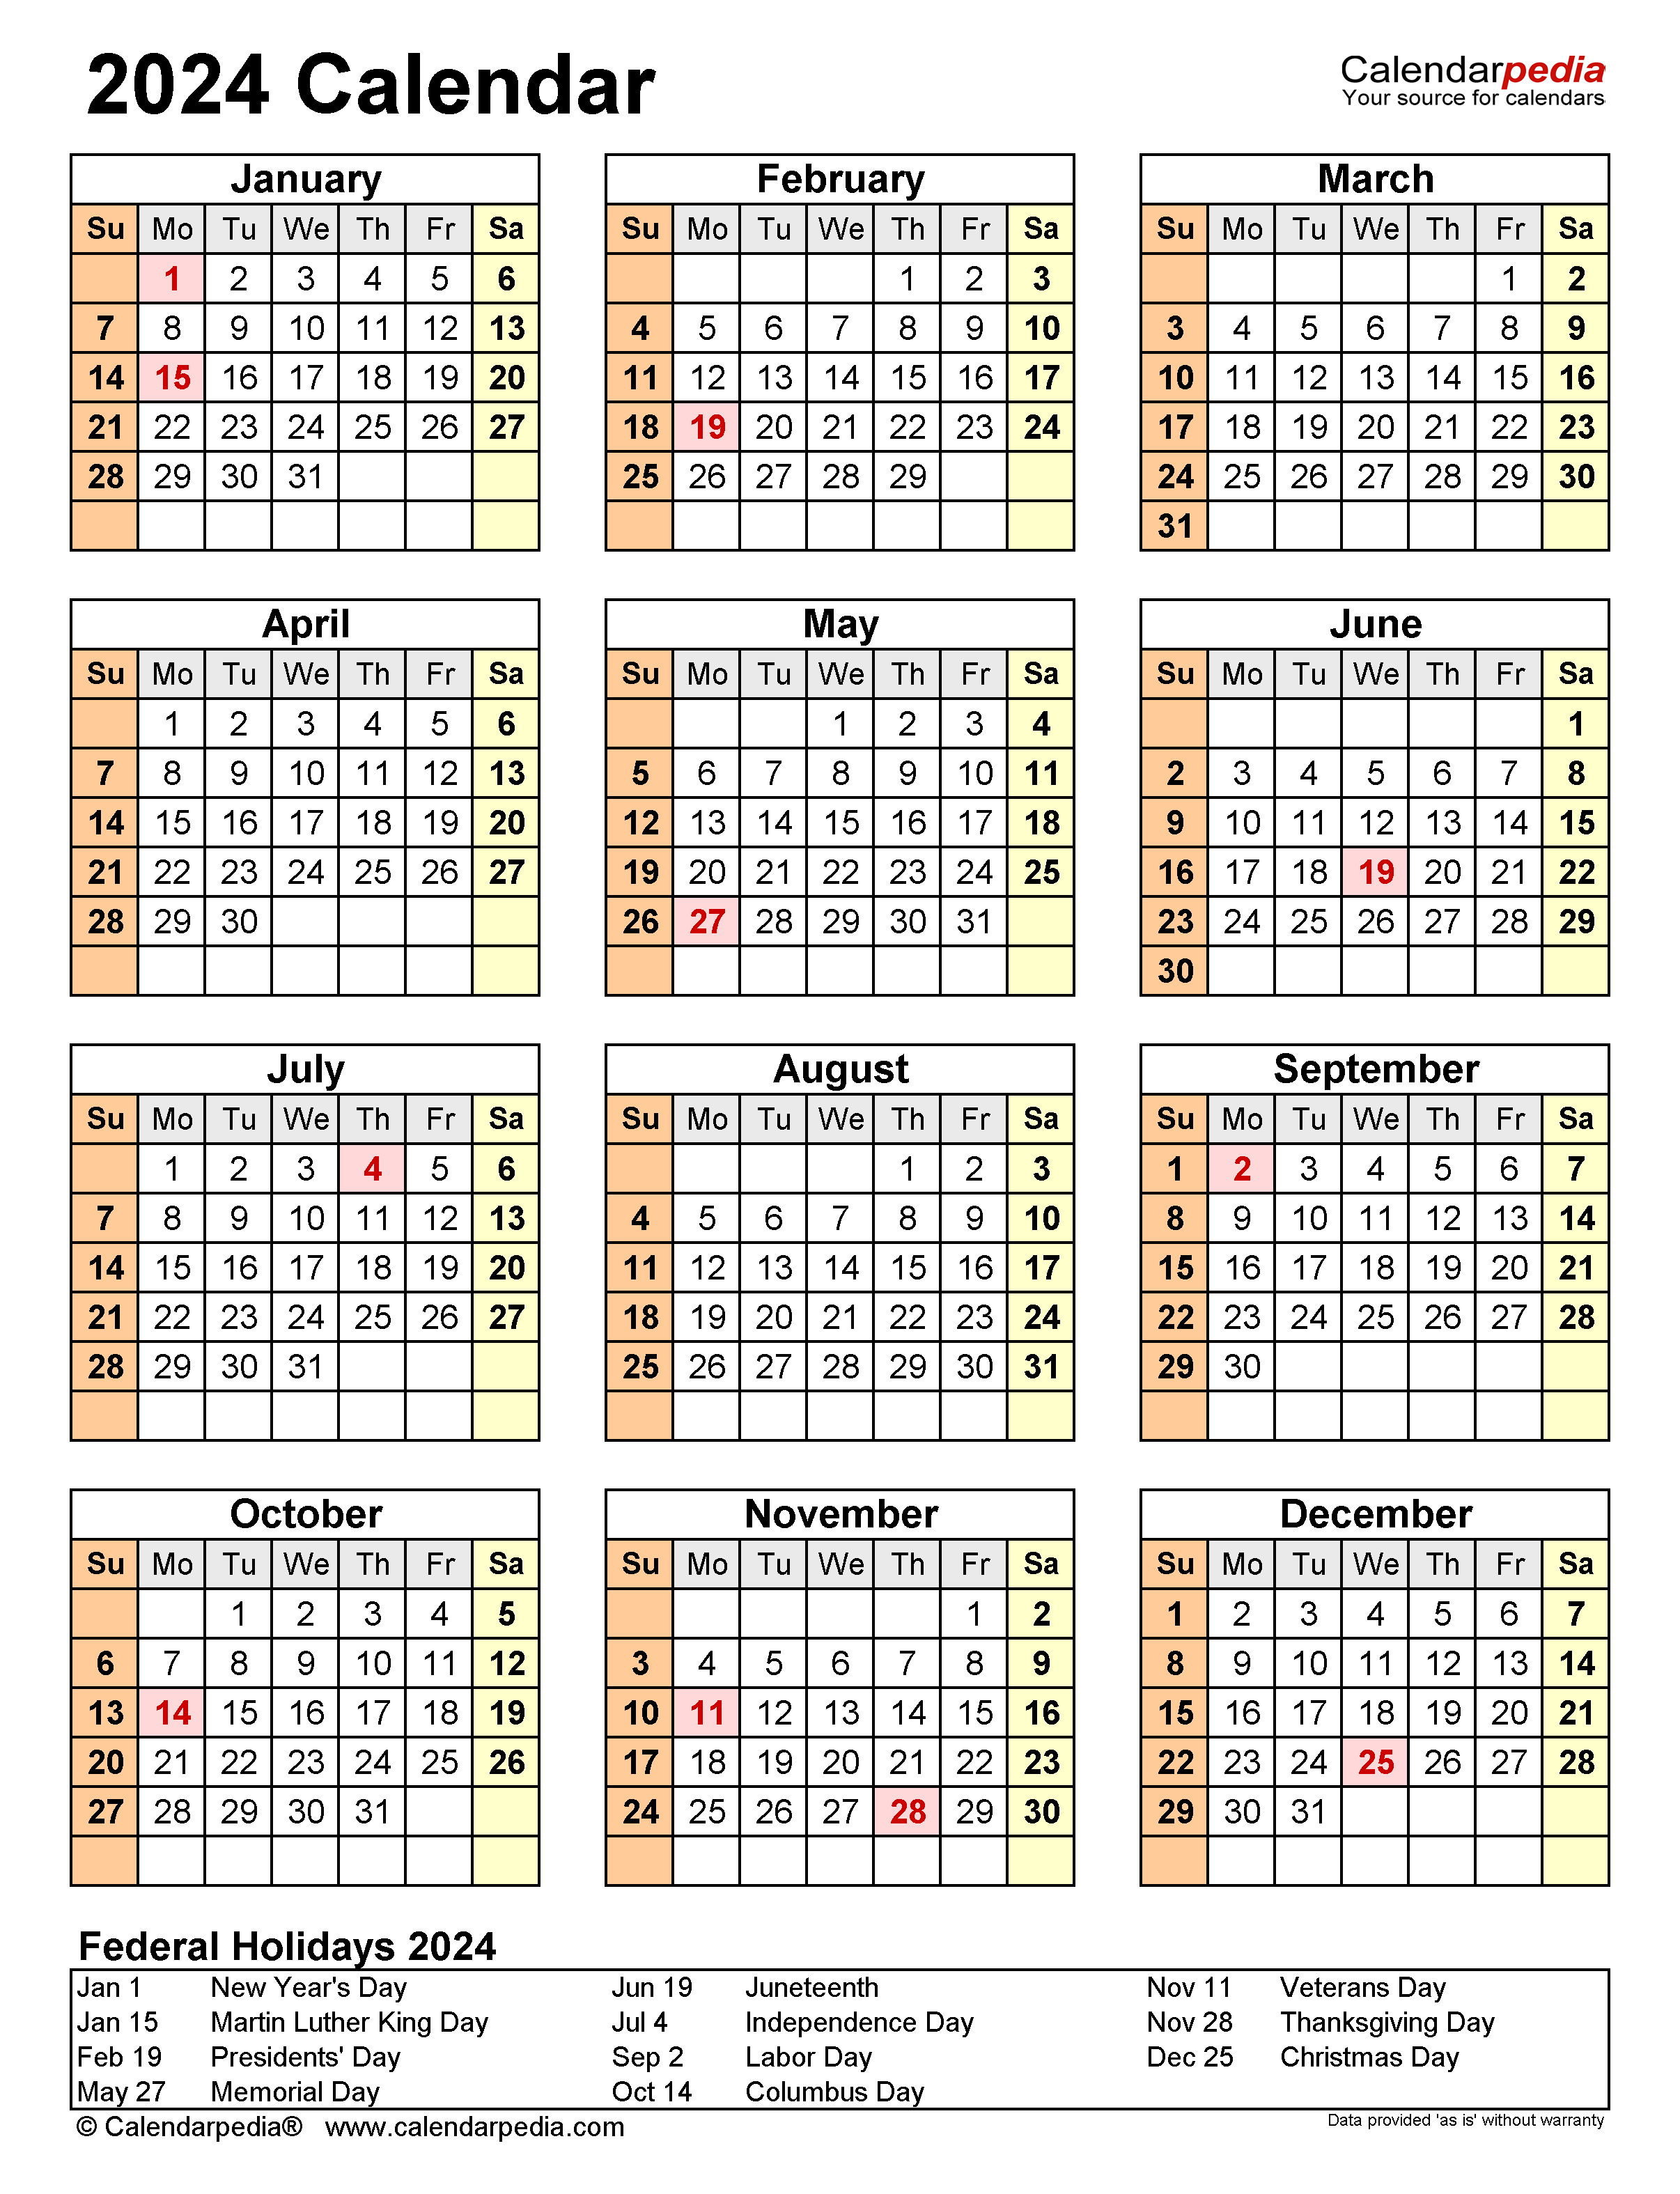 Free Printable 2024 Calendar With Holidays Crownflourmills | Free Printable 2024 Calendar With Holidays Without Downloading